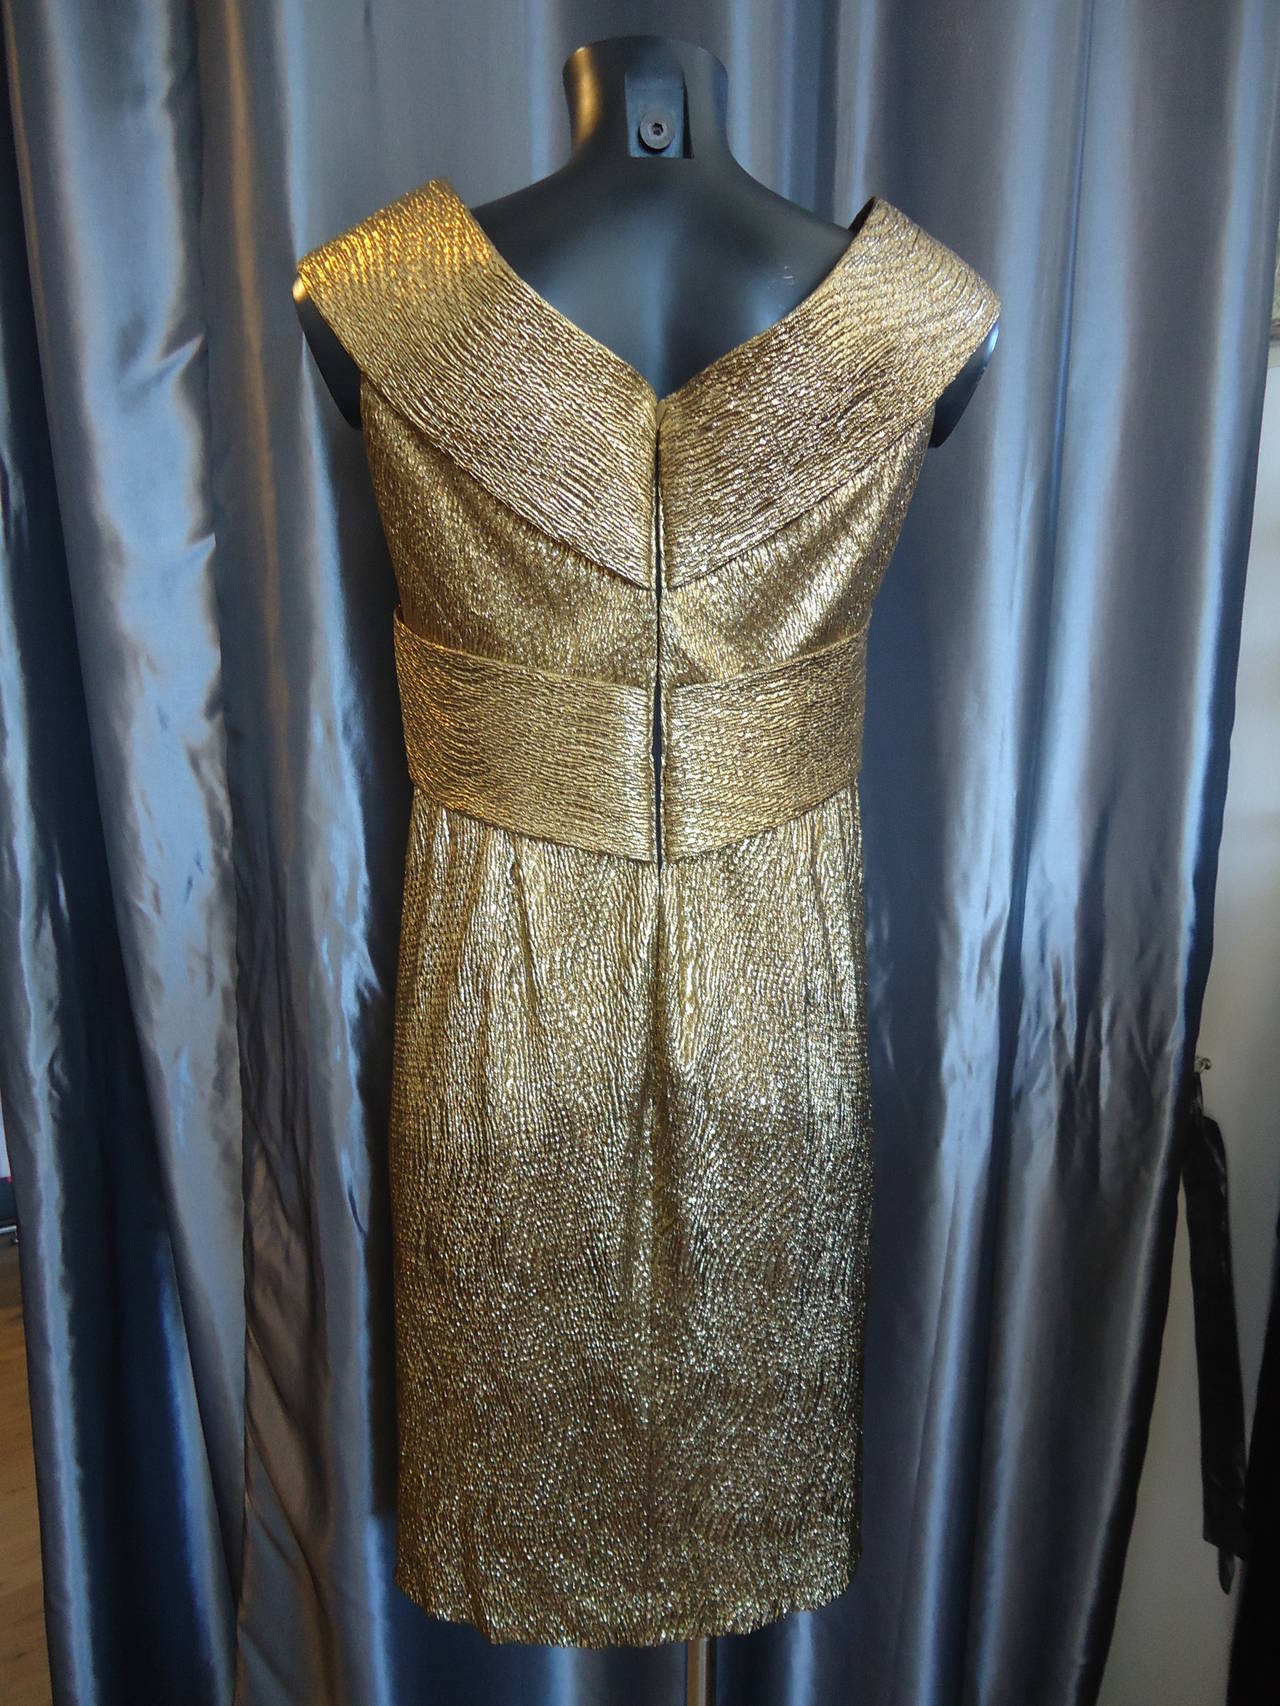 Fantastic dress made by the two british born designers Georgina Chapman and Keren Craig
Marchesa Notte, brand that creates elegant eveningwear and one of a kind couture designs, loved by red carpets celebrities and all ages women
Bronze gold